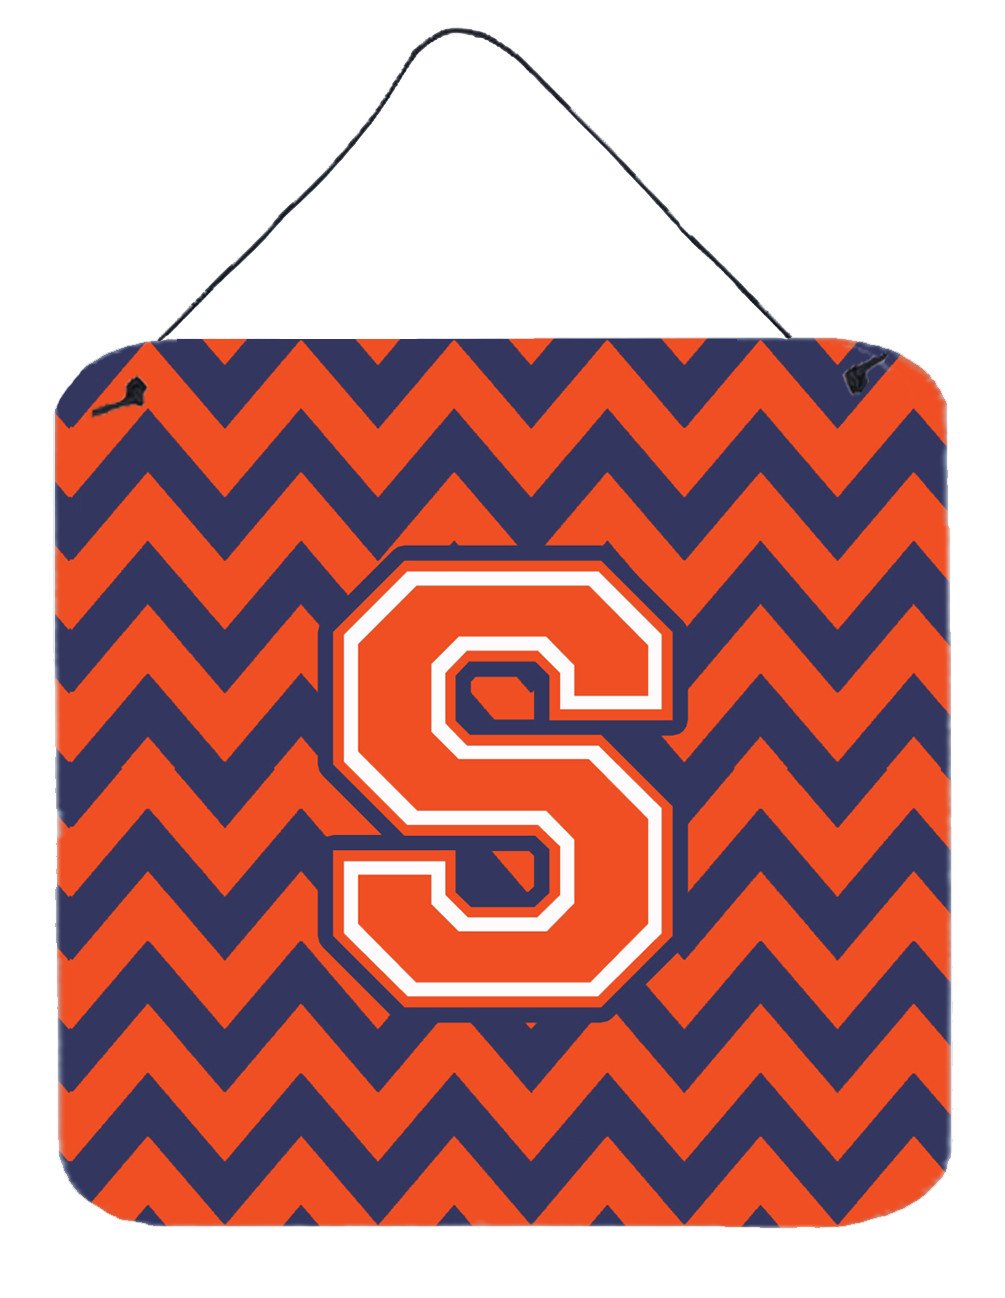 Letter S Chevron Orange and Blue Wall or Door Hanging Prints CJ1042-SDS66 by Caroline's Treasures